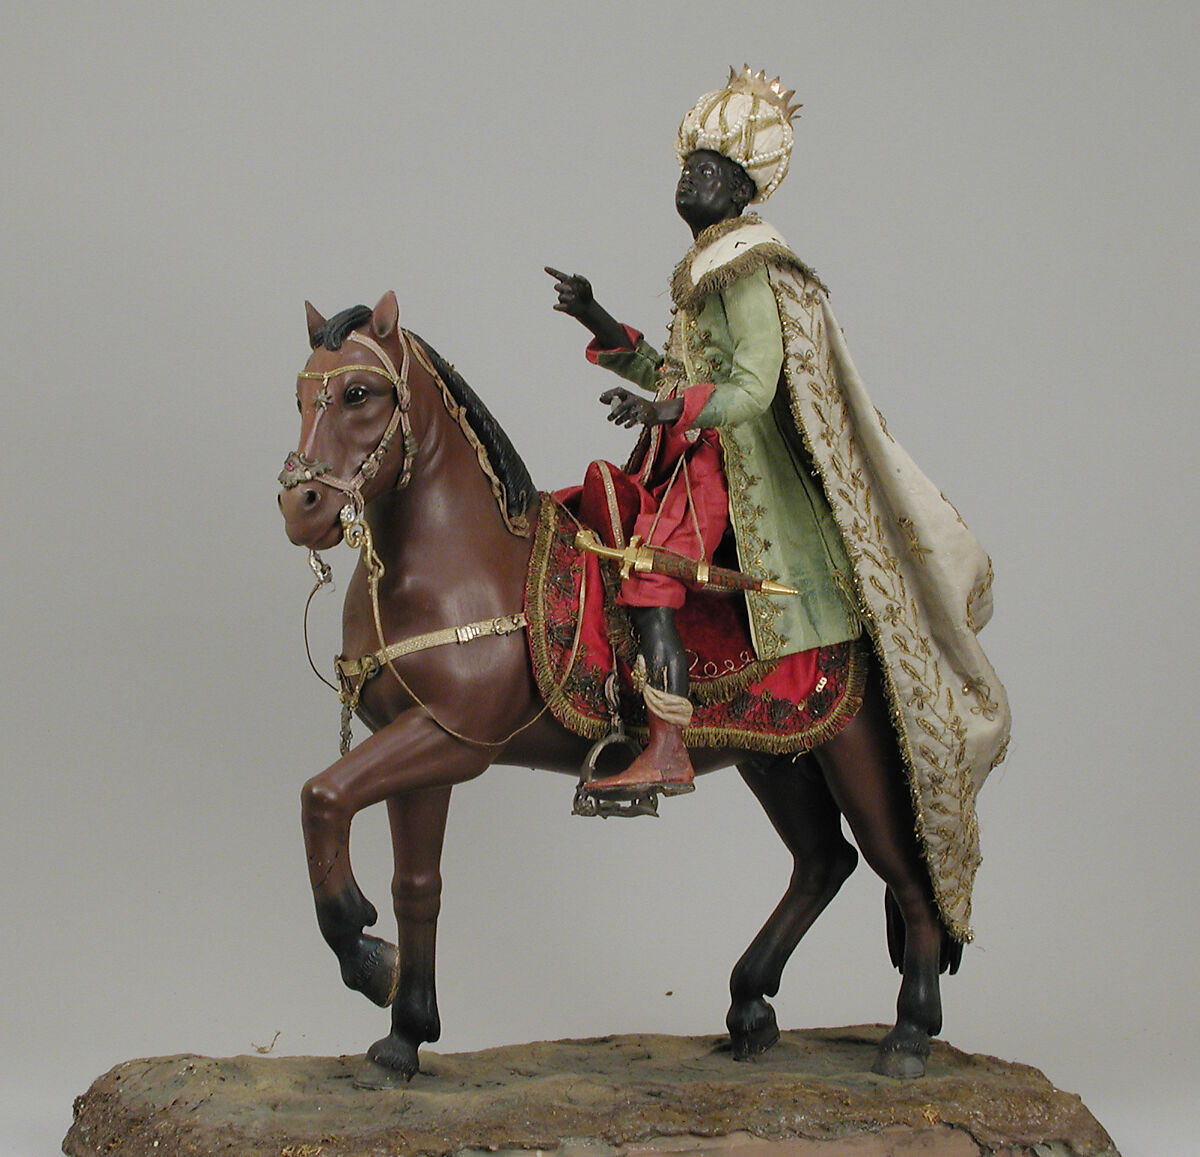 Brown horse, Polychromed terracotta body; wooden legs and tail; velvet covered wooden saddle; satin saddle blanket fringed with metallic thread; gold threaded girth with gilt buckles; silver martingale; gold braided mane and reins; silver braided bridle and silver stirrups